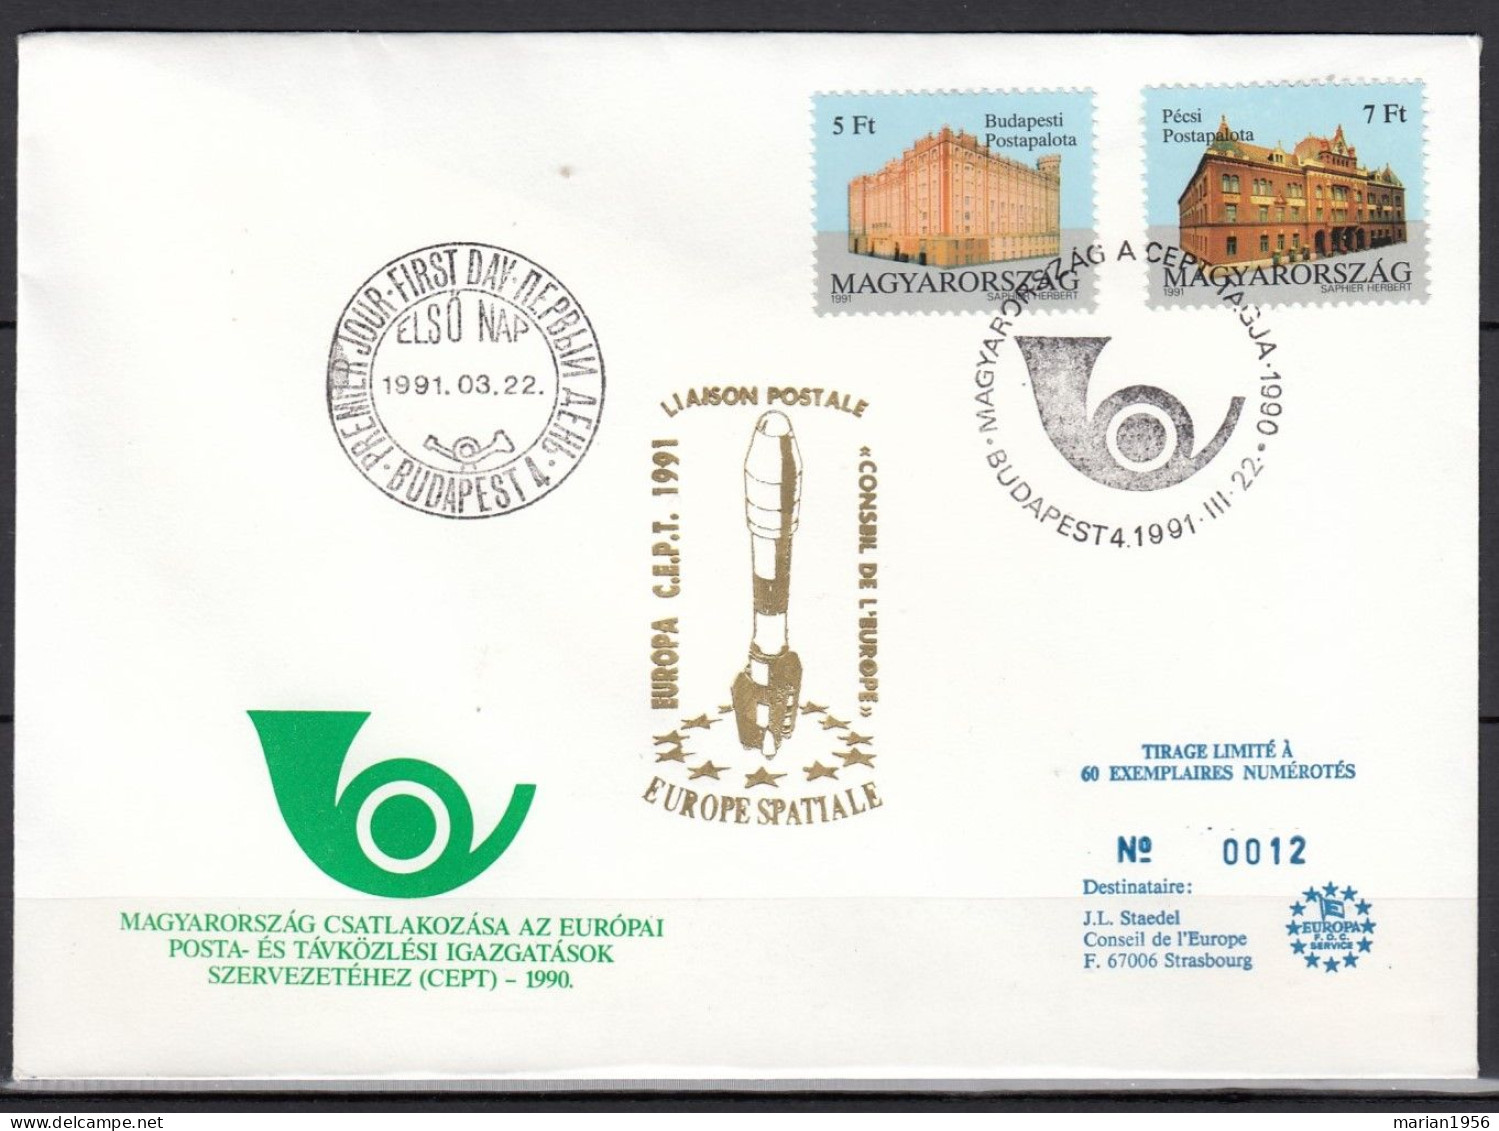 Hongrie 1991 - FDC Special - EUROPA CEPT- Europe Spatiale - Tirage Limite A 60 Ex.numerotes - 1991